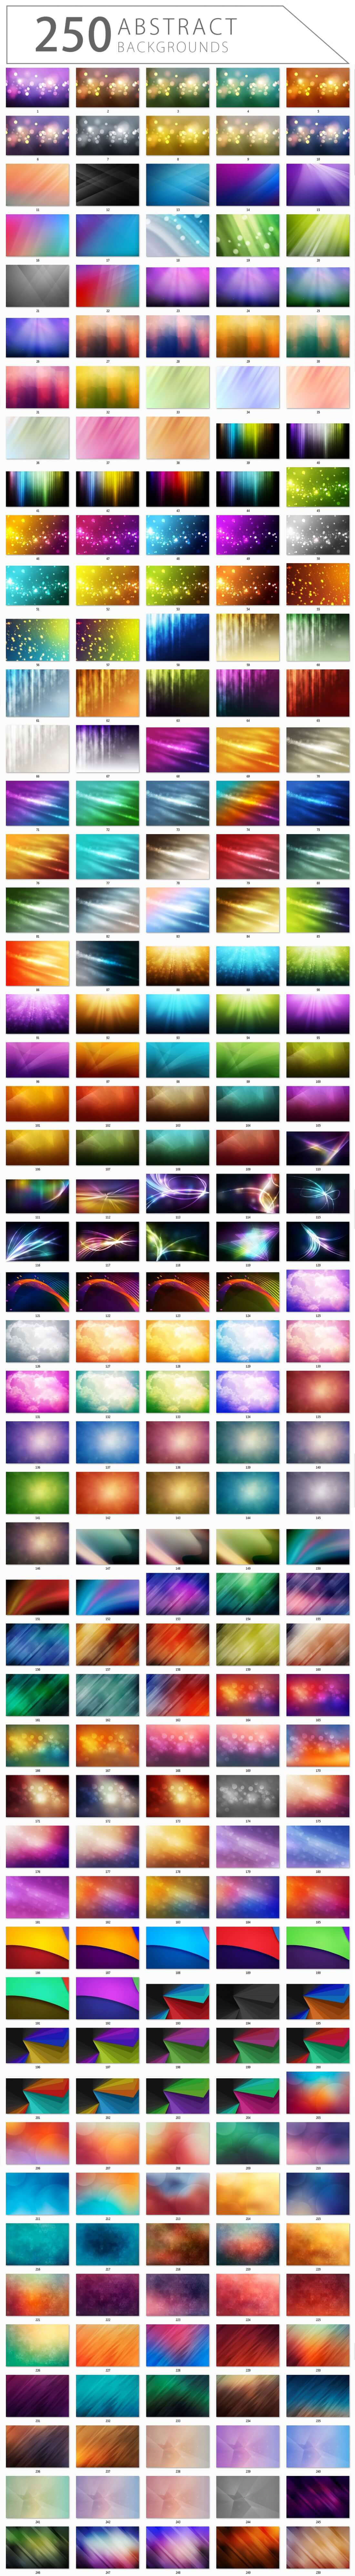 250-Abstract-Backgrounds-prev-2A